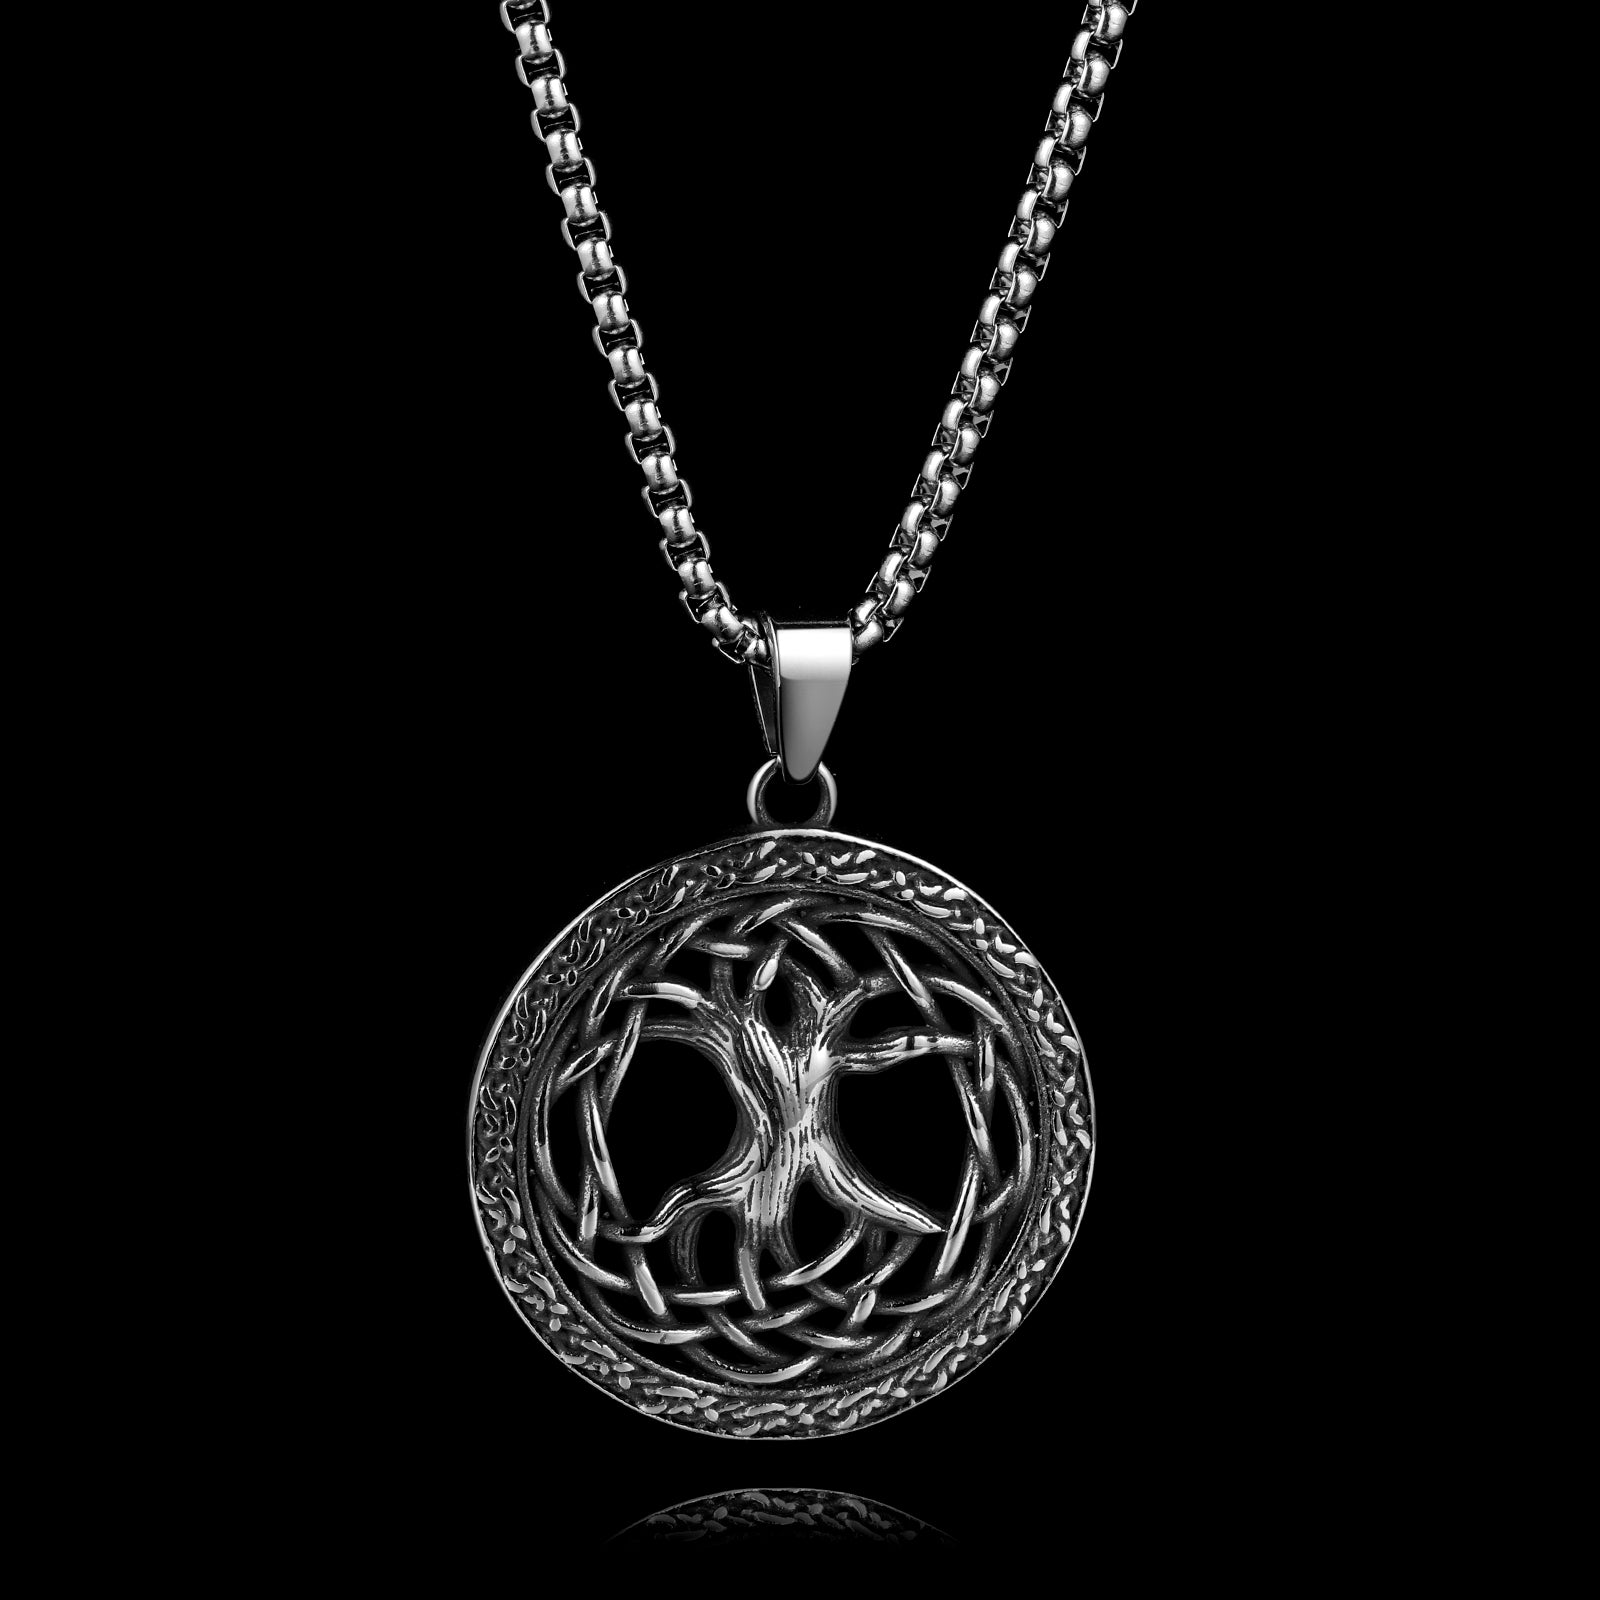 TREE OF LIFE. - NECKLACE